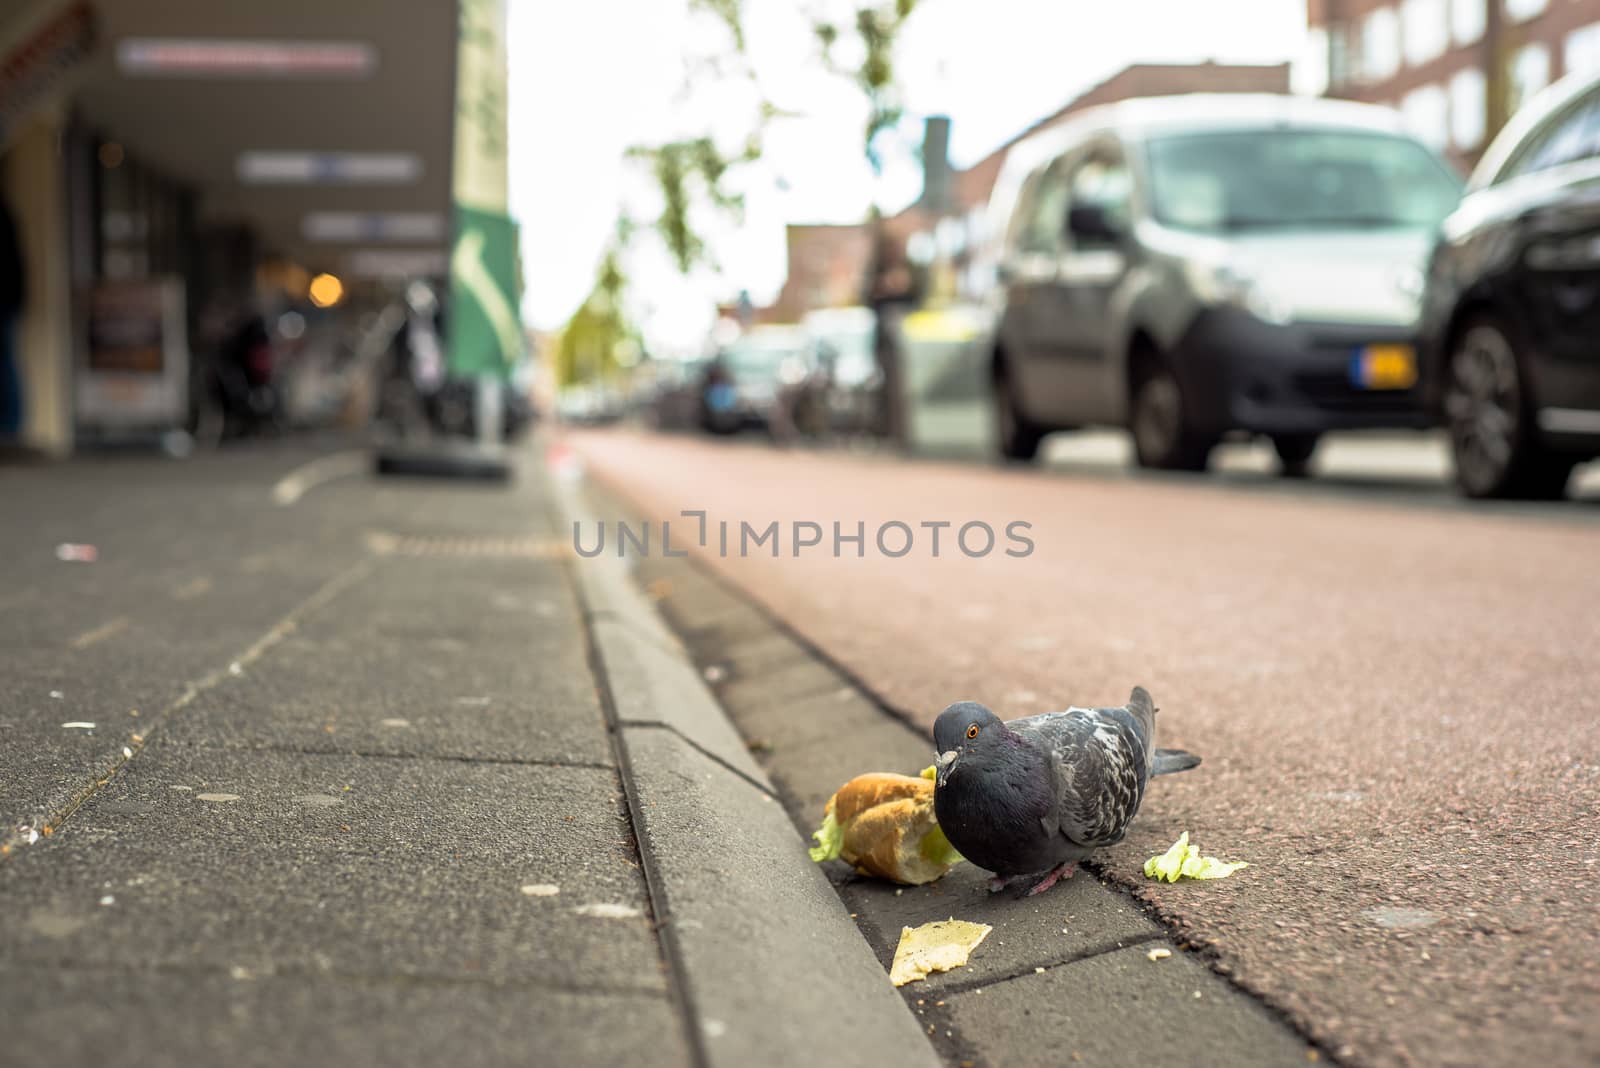 A pigeon eating a sandwich in Amsterdam, the Netherlands by Pendleton